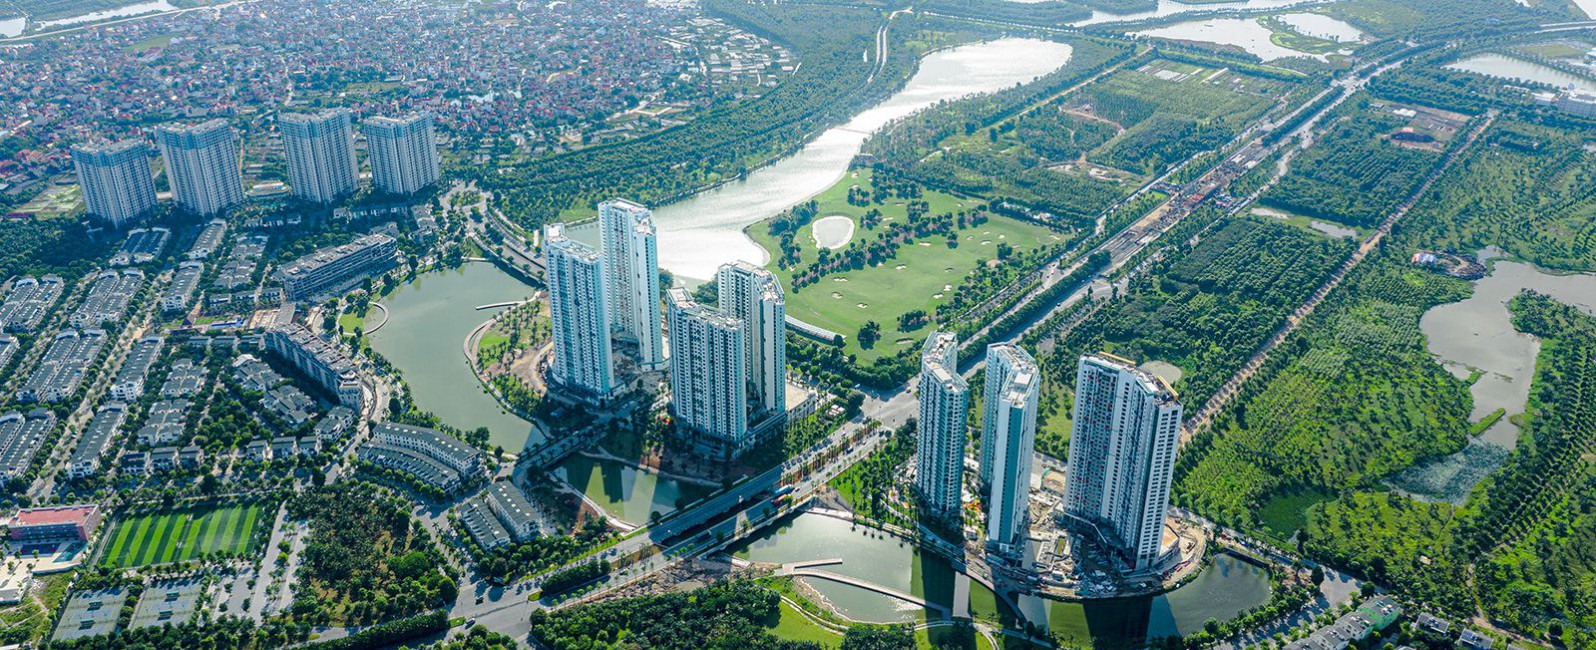 Ecopark overview